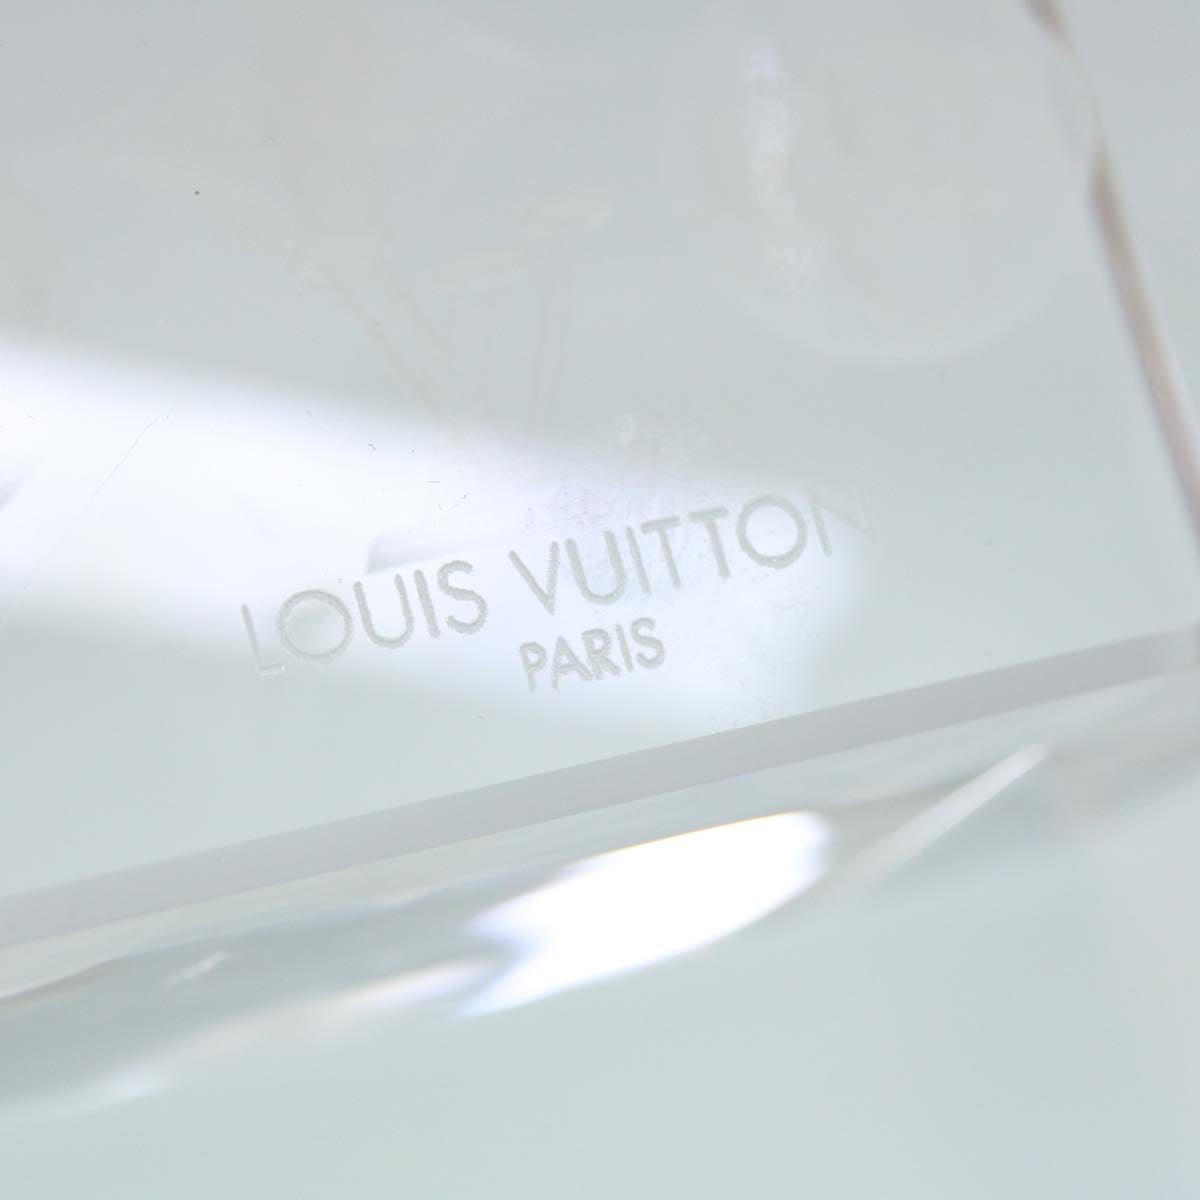 LOUIS VUITTON Paper Weight Crystal Glass Clear LV Auth 42240